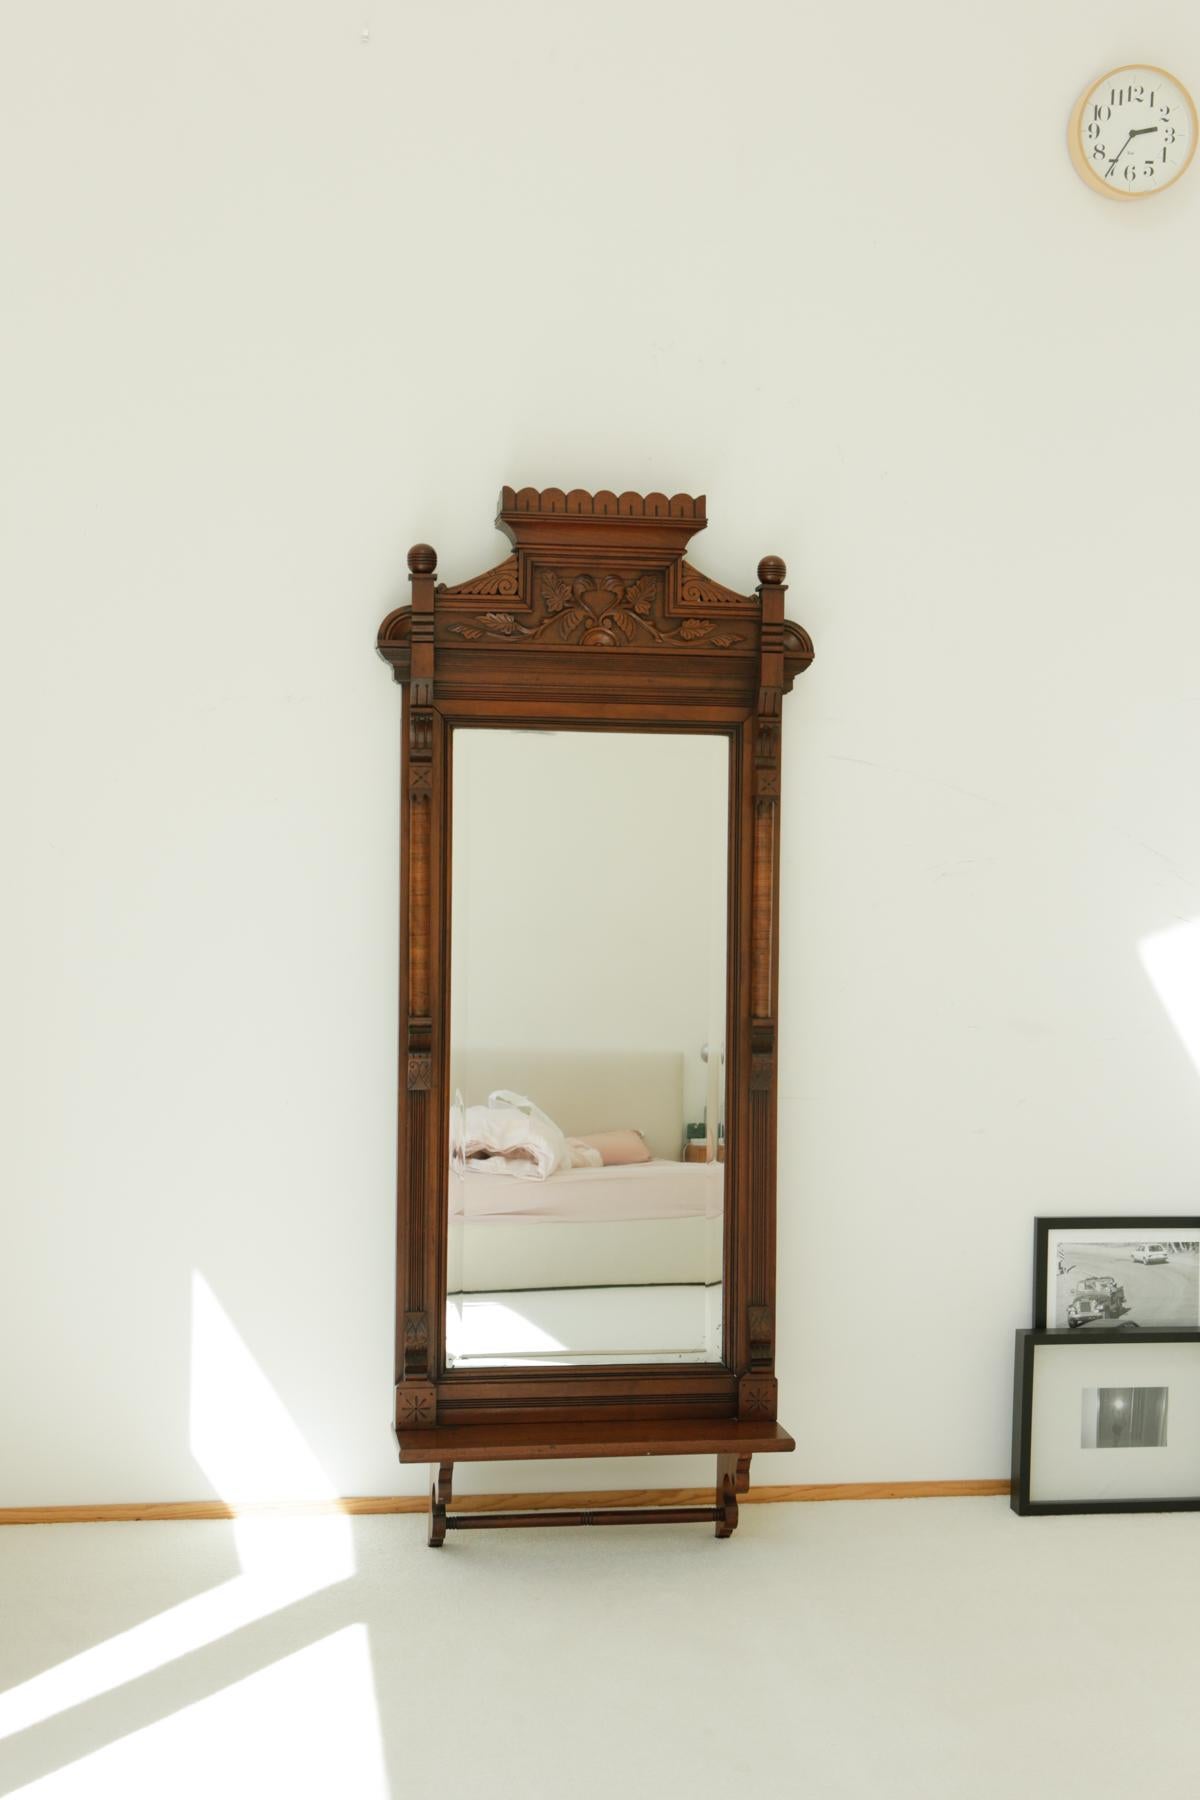 Circa 1820s Carved Solid Mahogany Wall Mirror with Shelf 5